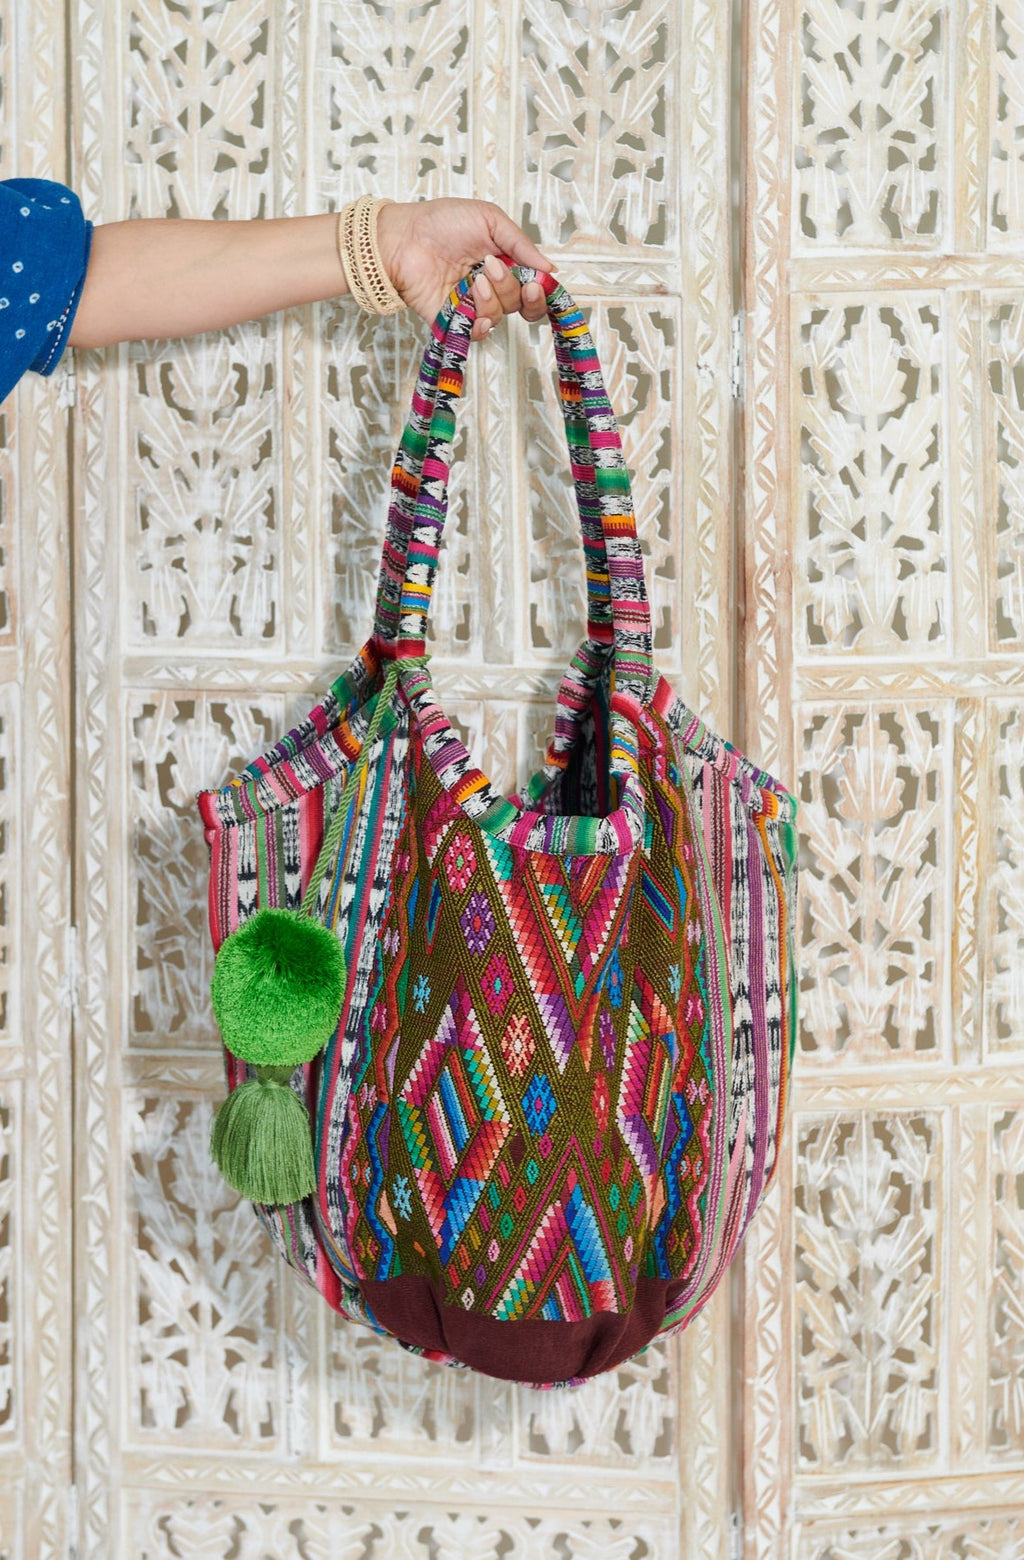 Colorful bohemian tote bag crafted from Guatemalan textiles